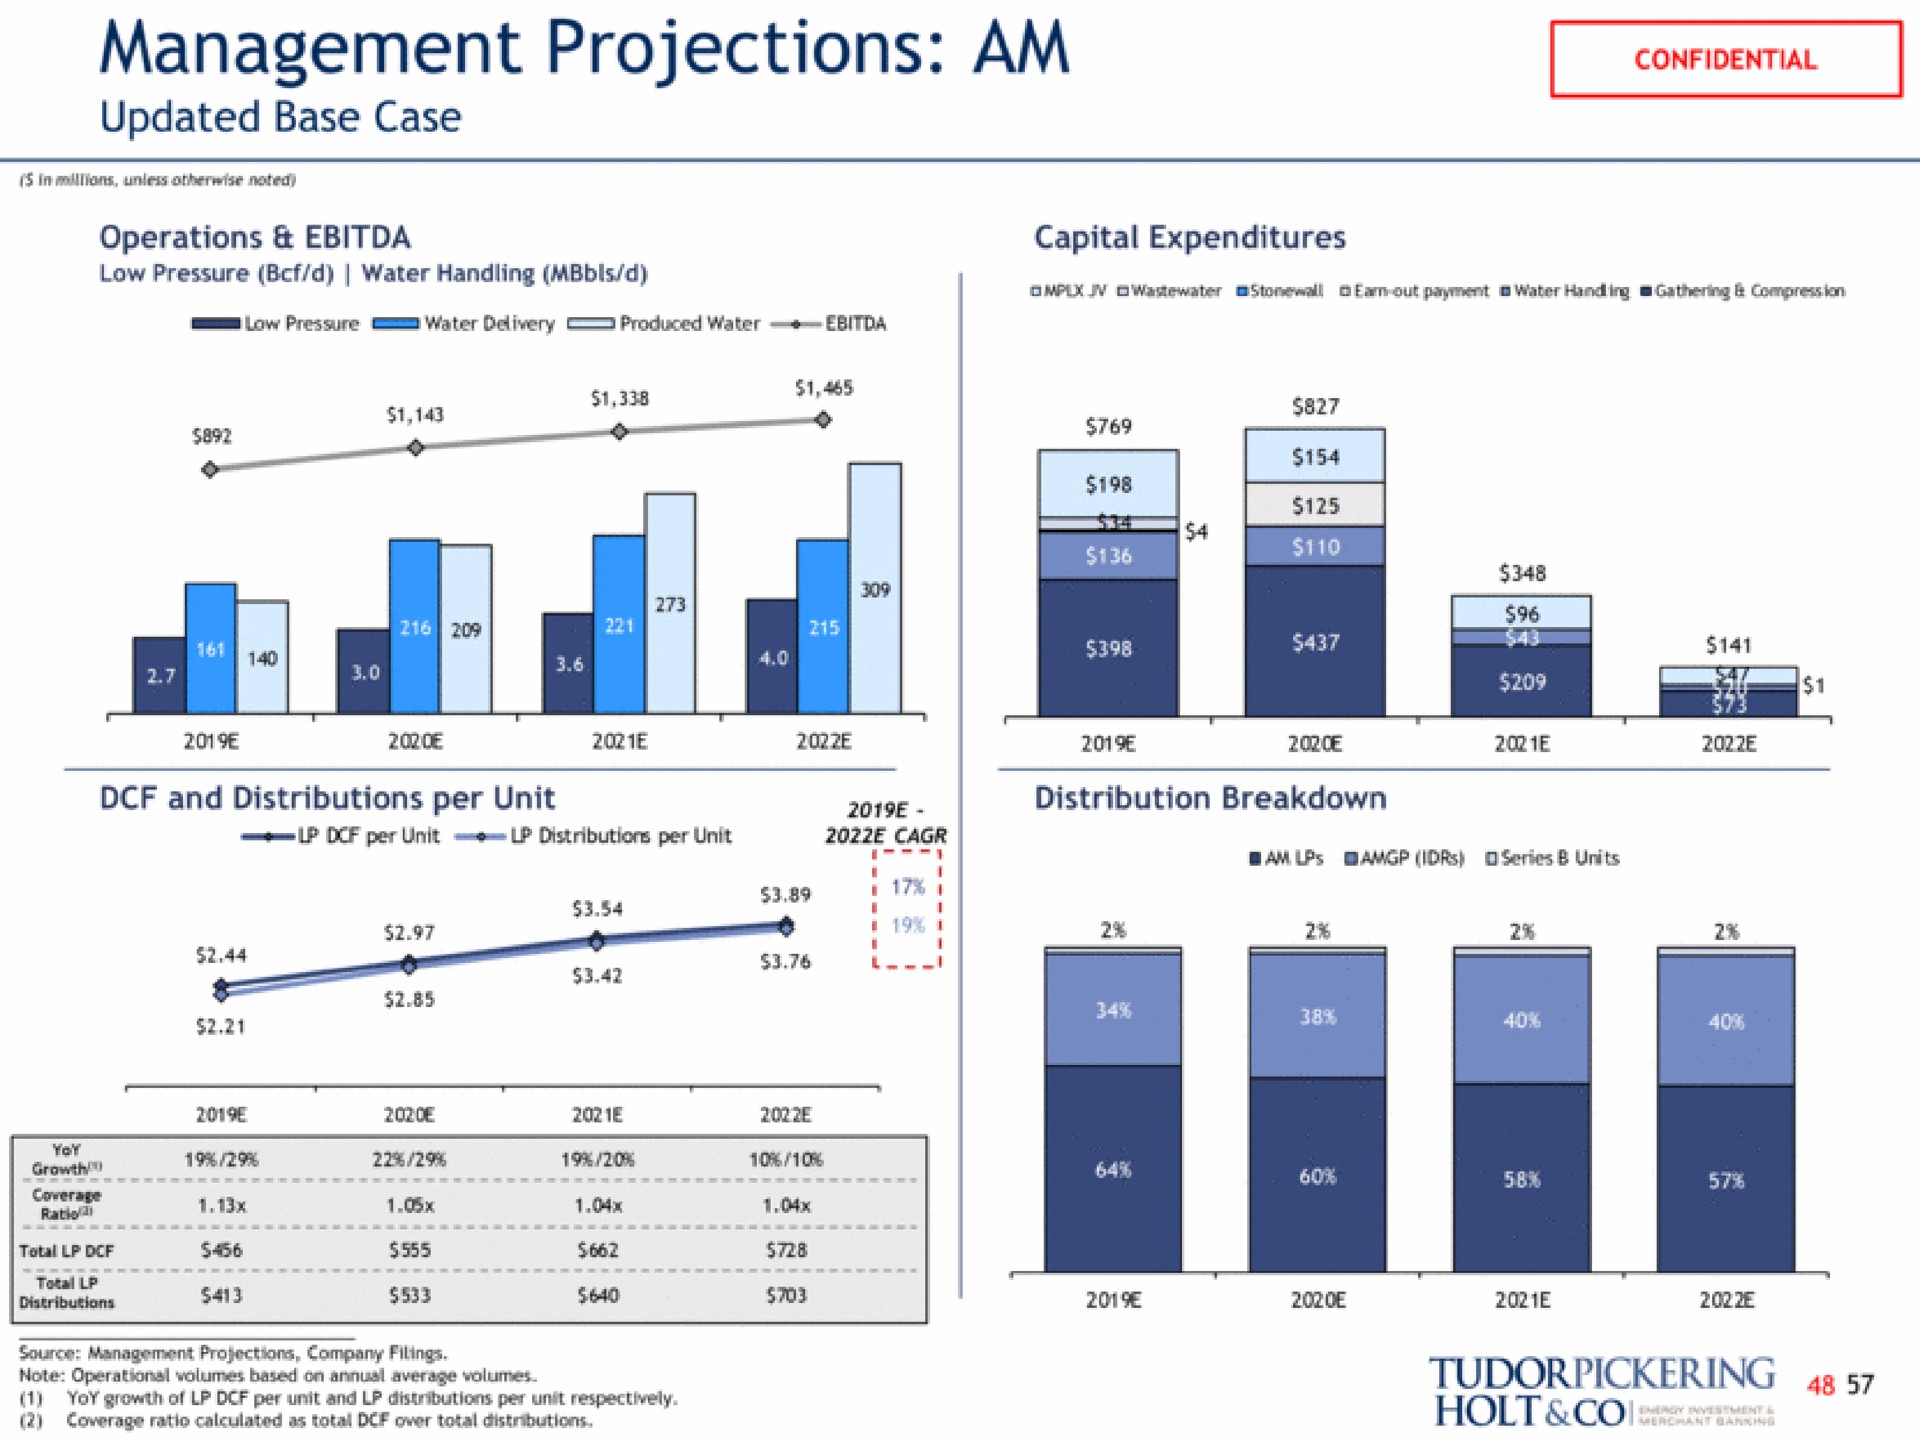 management projections am updated base case | Tudor, Pickering, Holt & Co